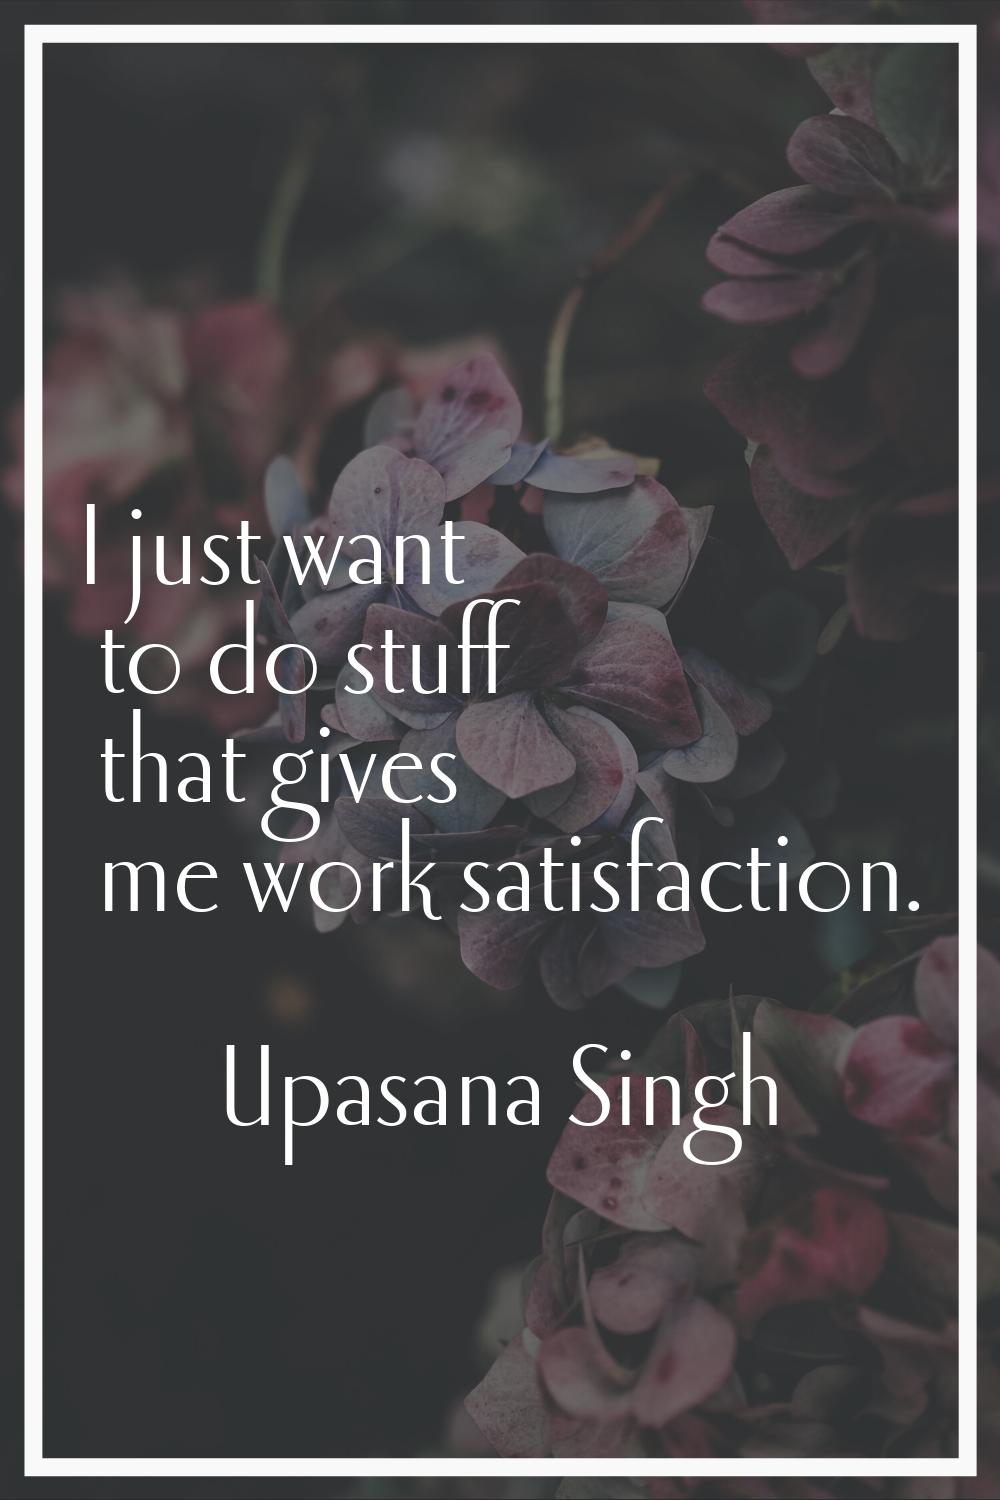 I just want to do stuff that gives me work satisfaction.